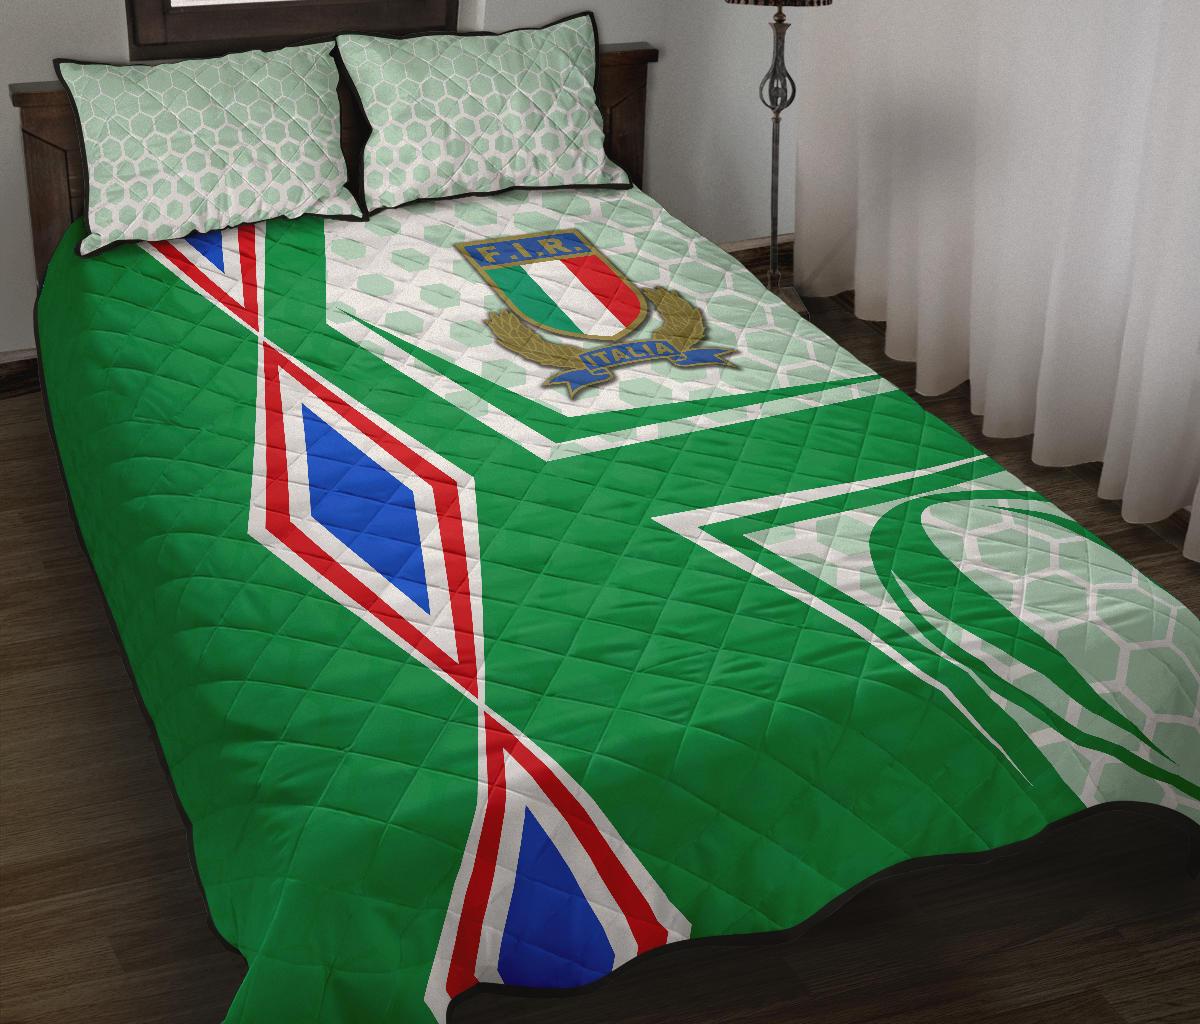 italy-rugby-quilt-bed-set-gli-azzurri-vibes-green